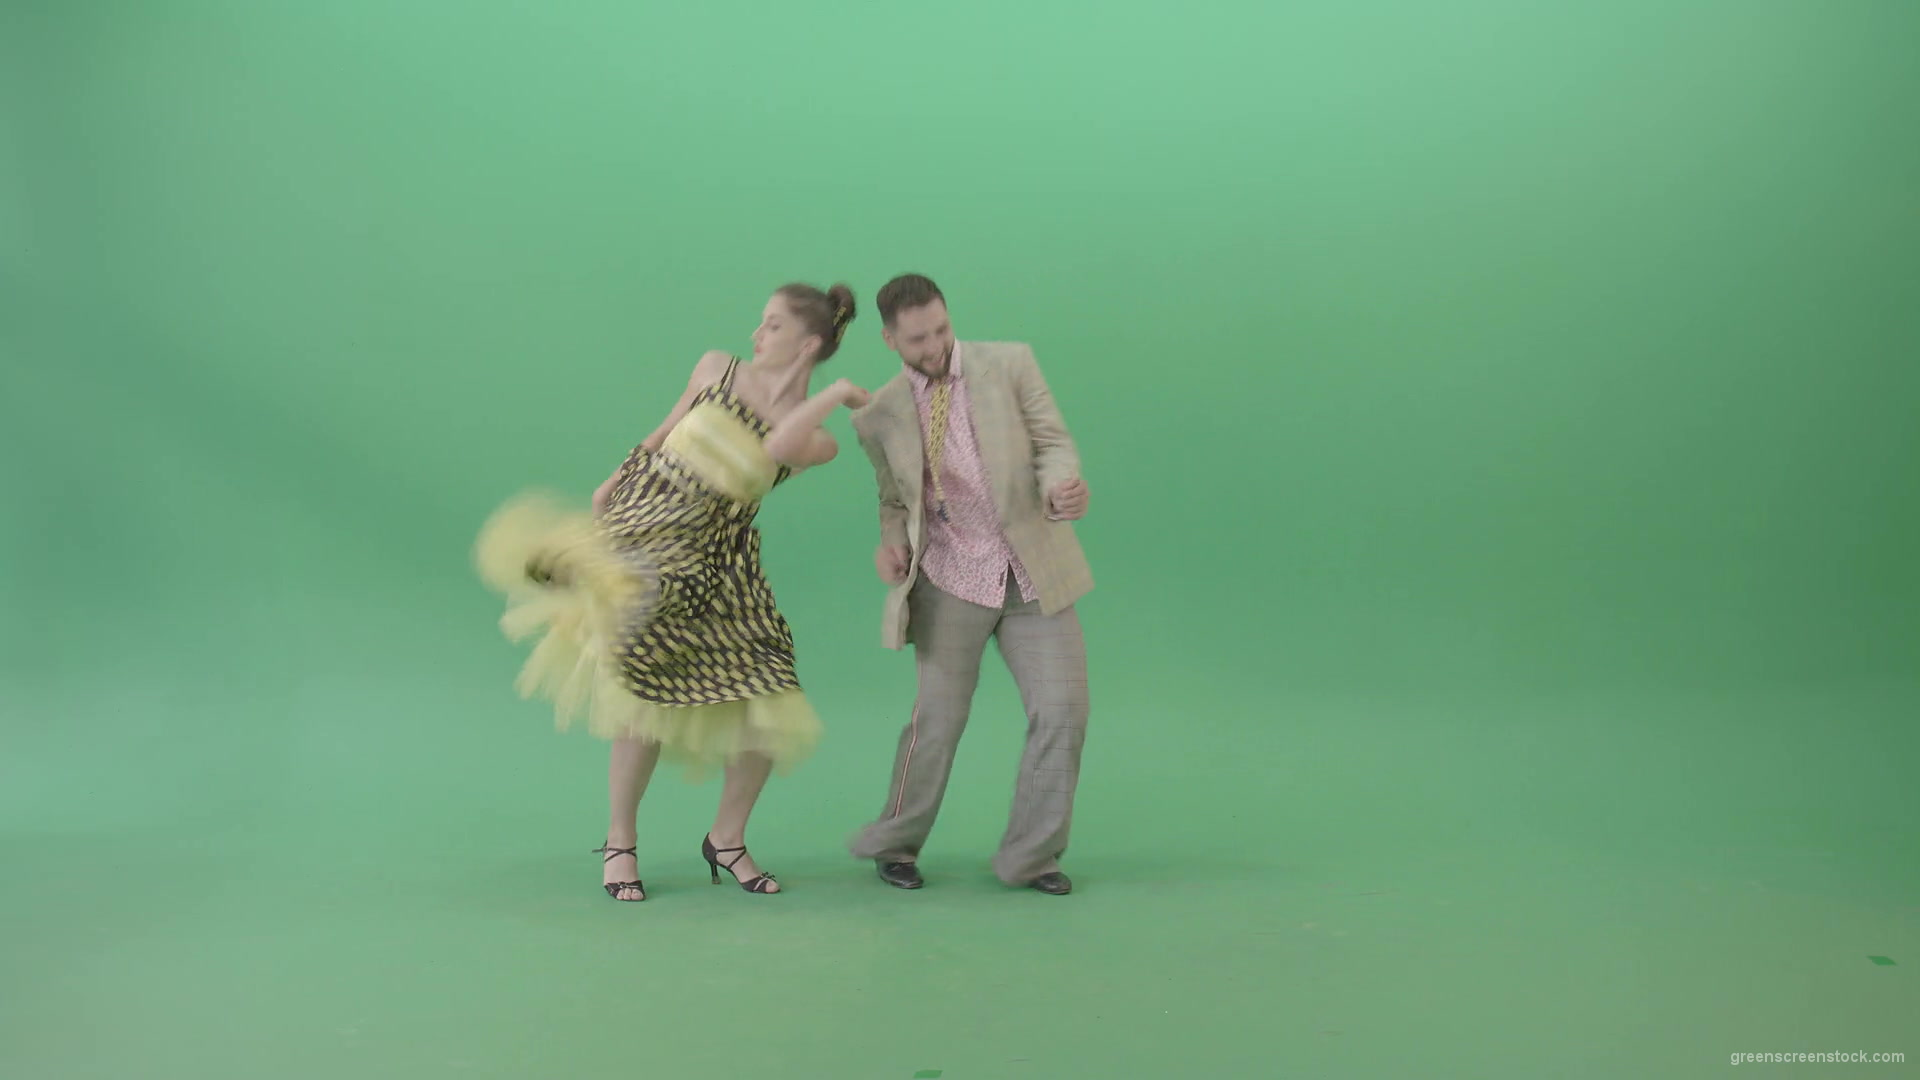 Happy-Man-and-woman-dancing-Boogie-woogie-moves-and-rock-and-roll-over-Green-Screen-4K-Video-Footage-1920_006 Green Screen Stock